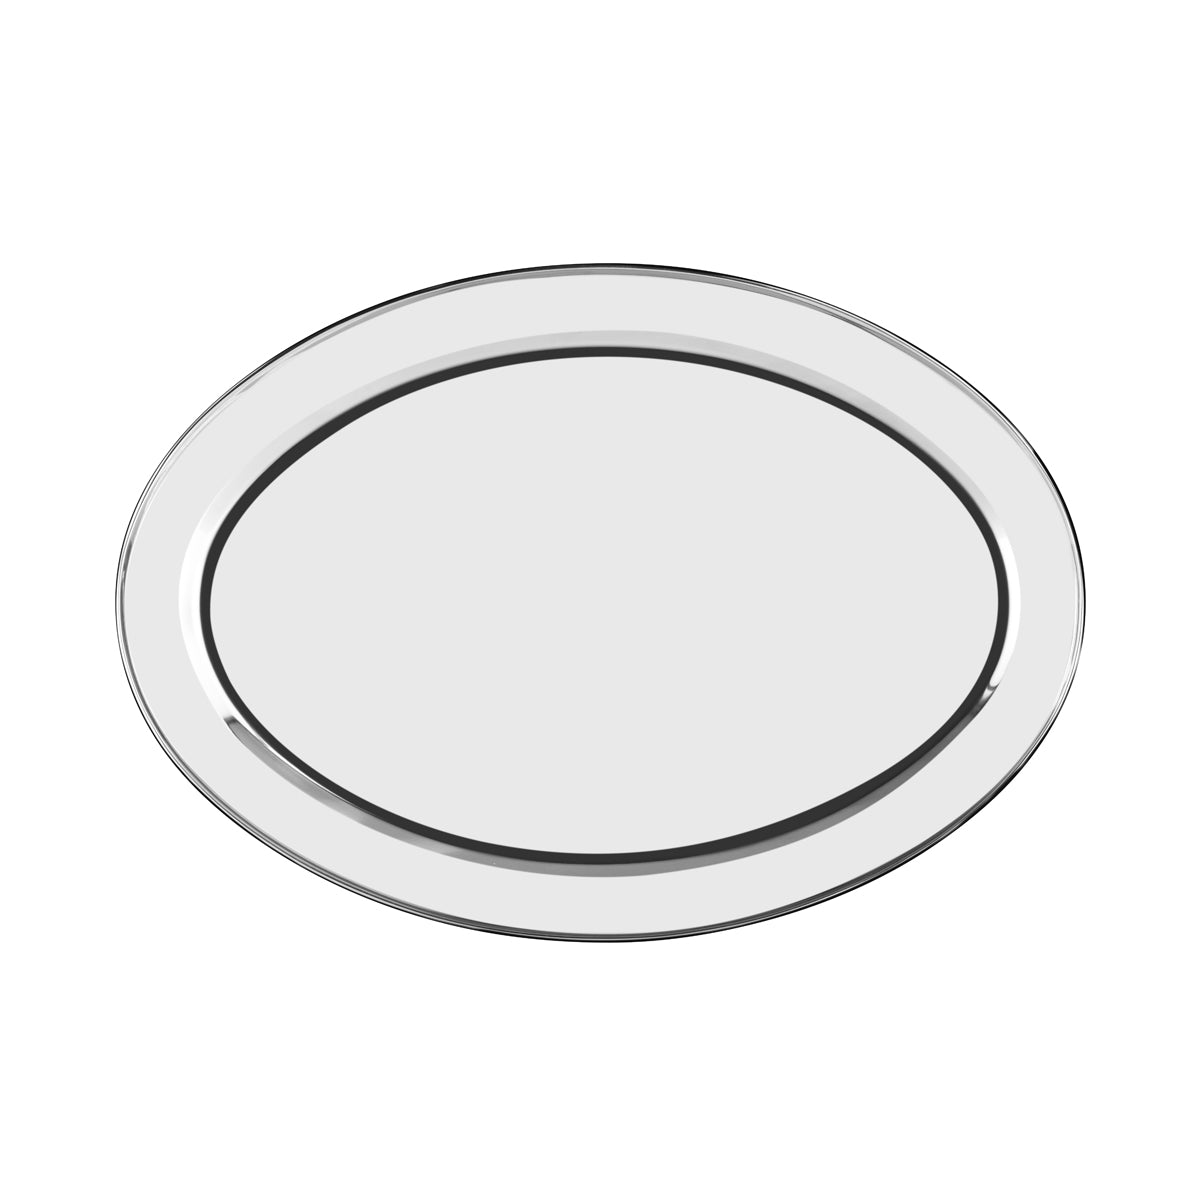 70722 Chef Inox Oval Platter Rolled Edge Stainless Steel 550x445mm Tomkin Australia Hospitality Supplies